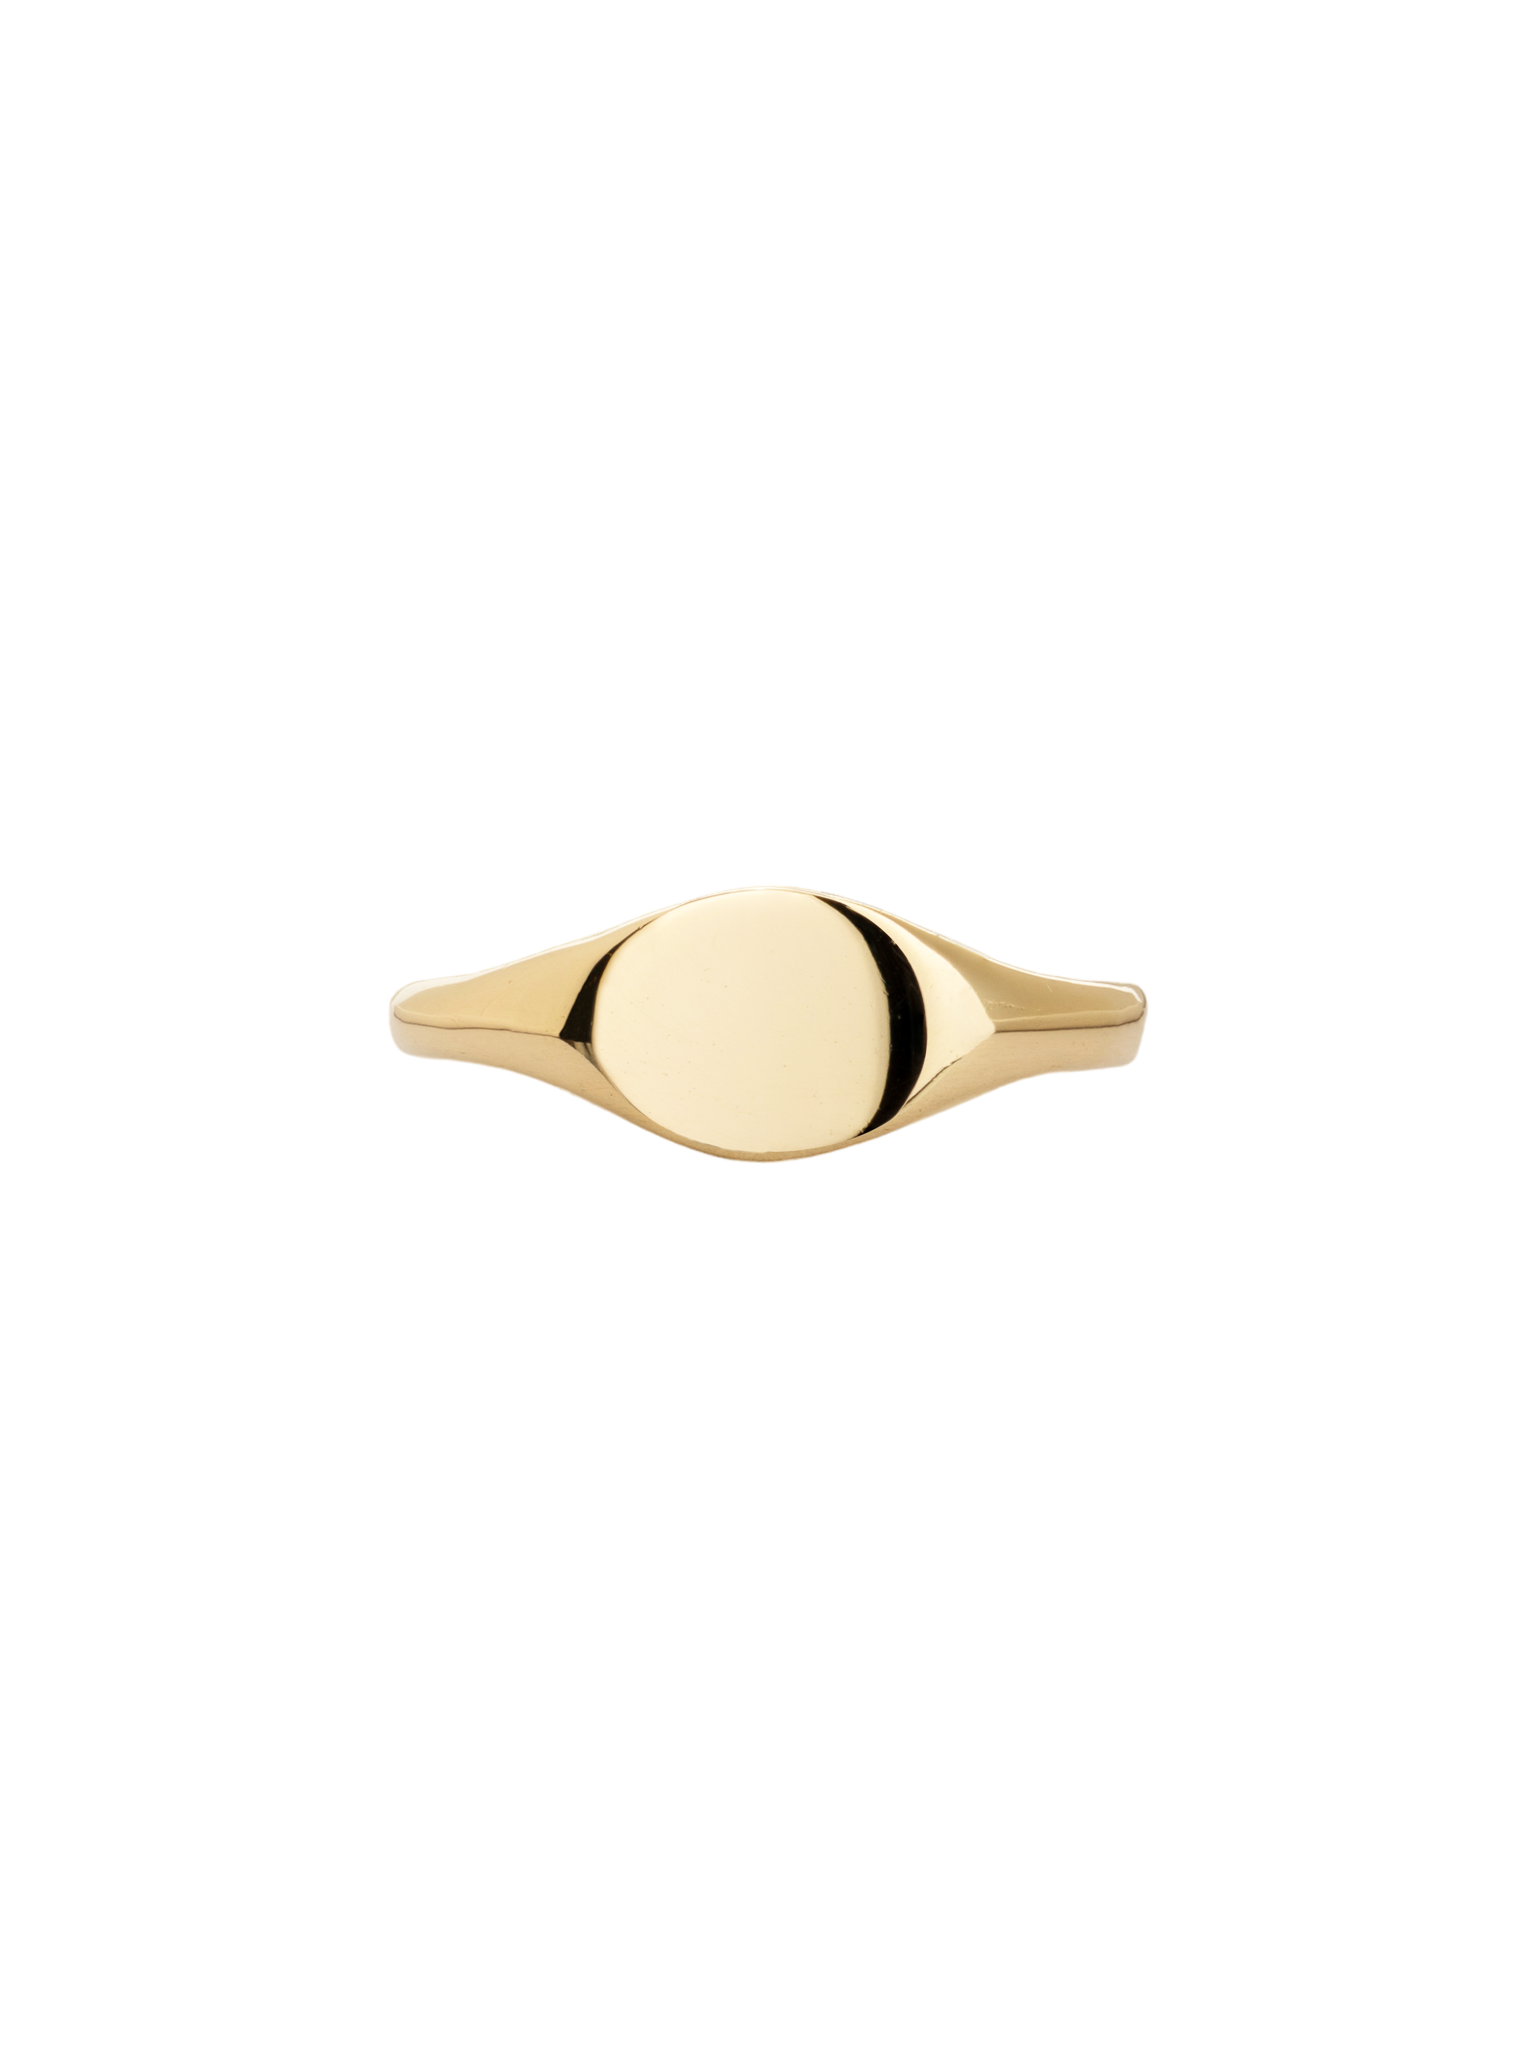 18ct Gold classic oval signet ring